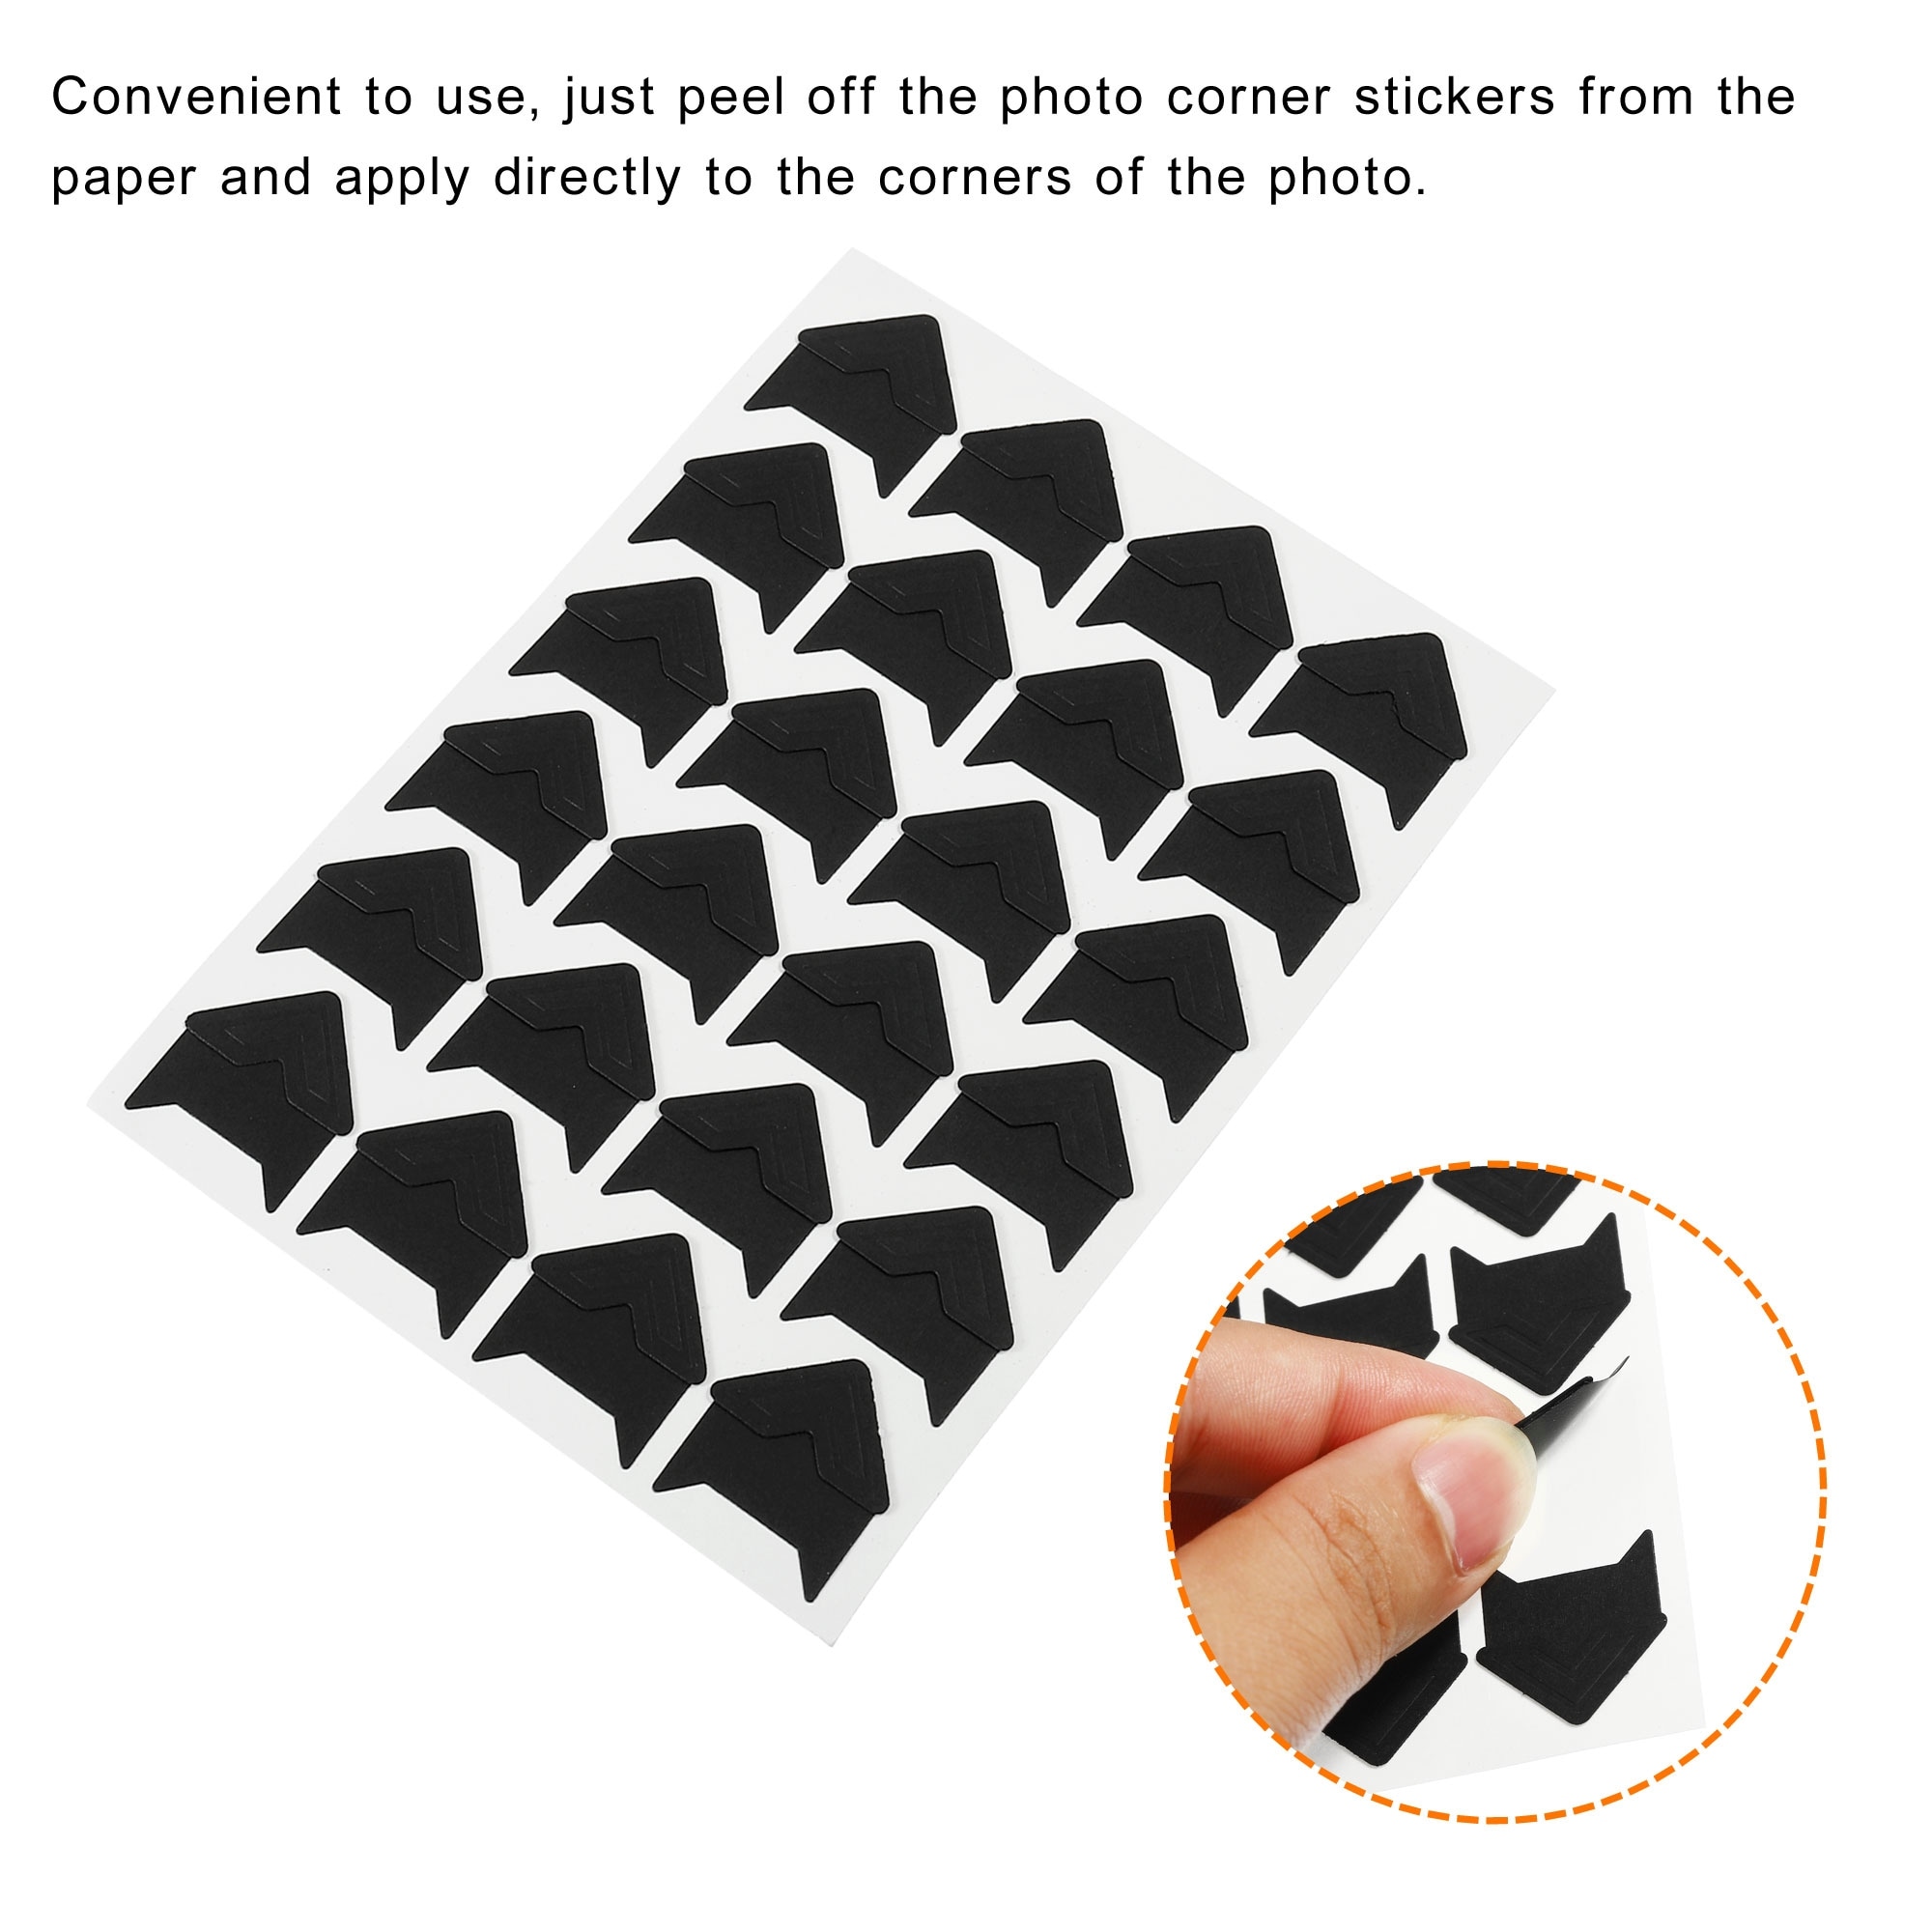 240pcs Self-Adhesive Photo Corners, Peel-Off Paper Photo Corner Stickers  Pictures Mounting Corners For Photo Album Scrapbooking Frame Decoration,  Blac